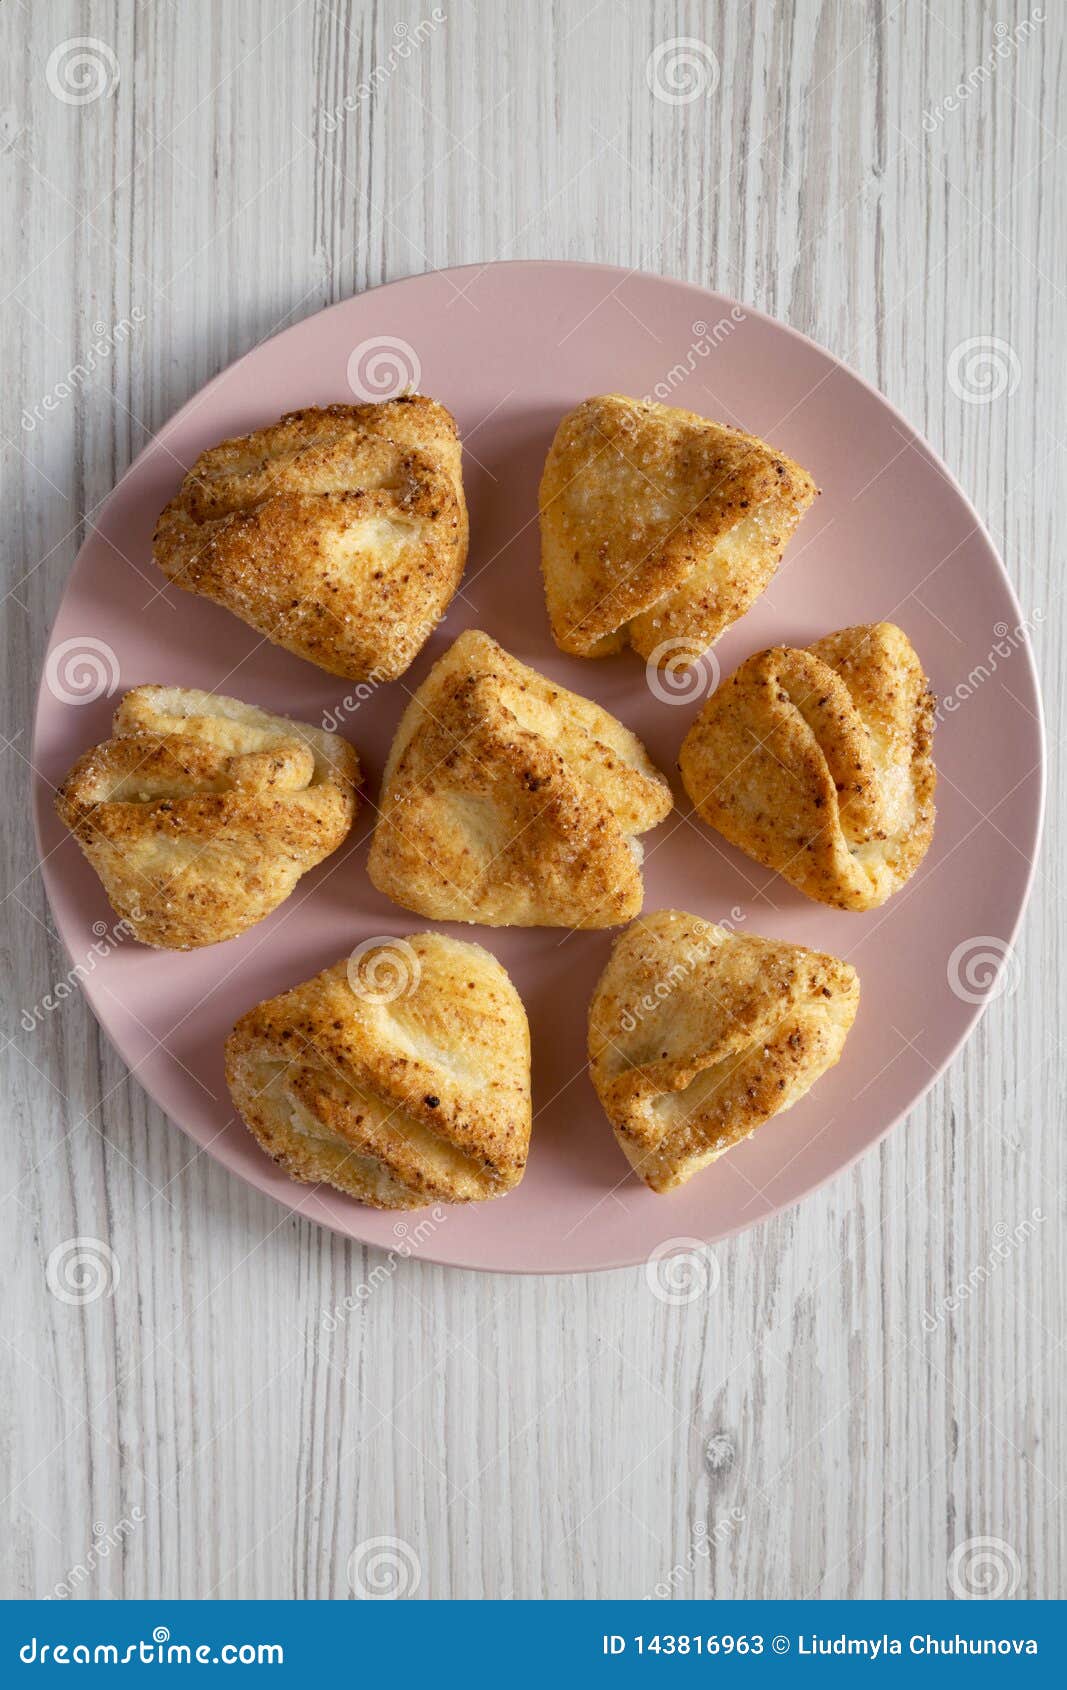 Home Baked Cottage Cheese Biscuits On Pink Plate Over White Wooden